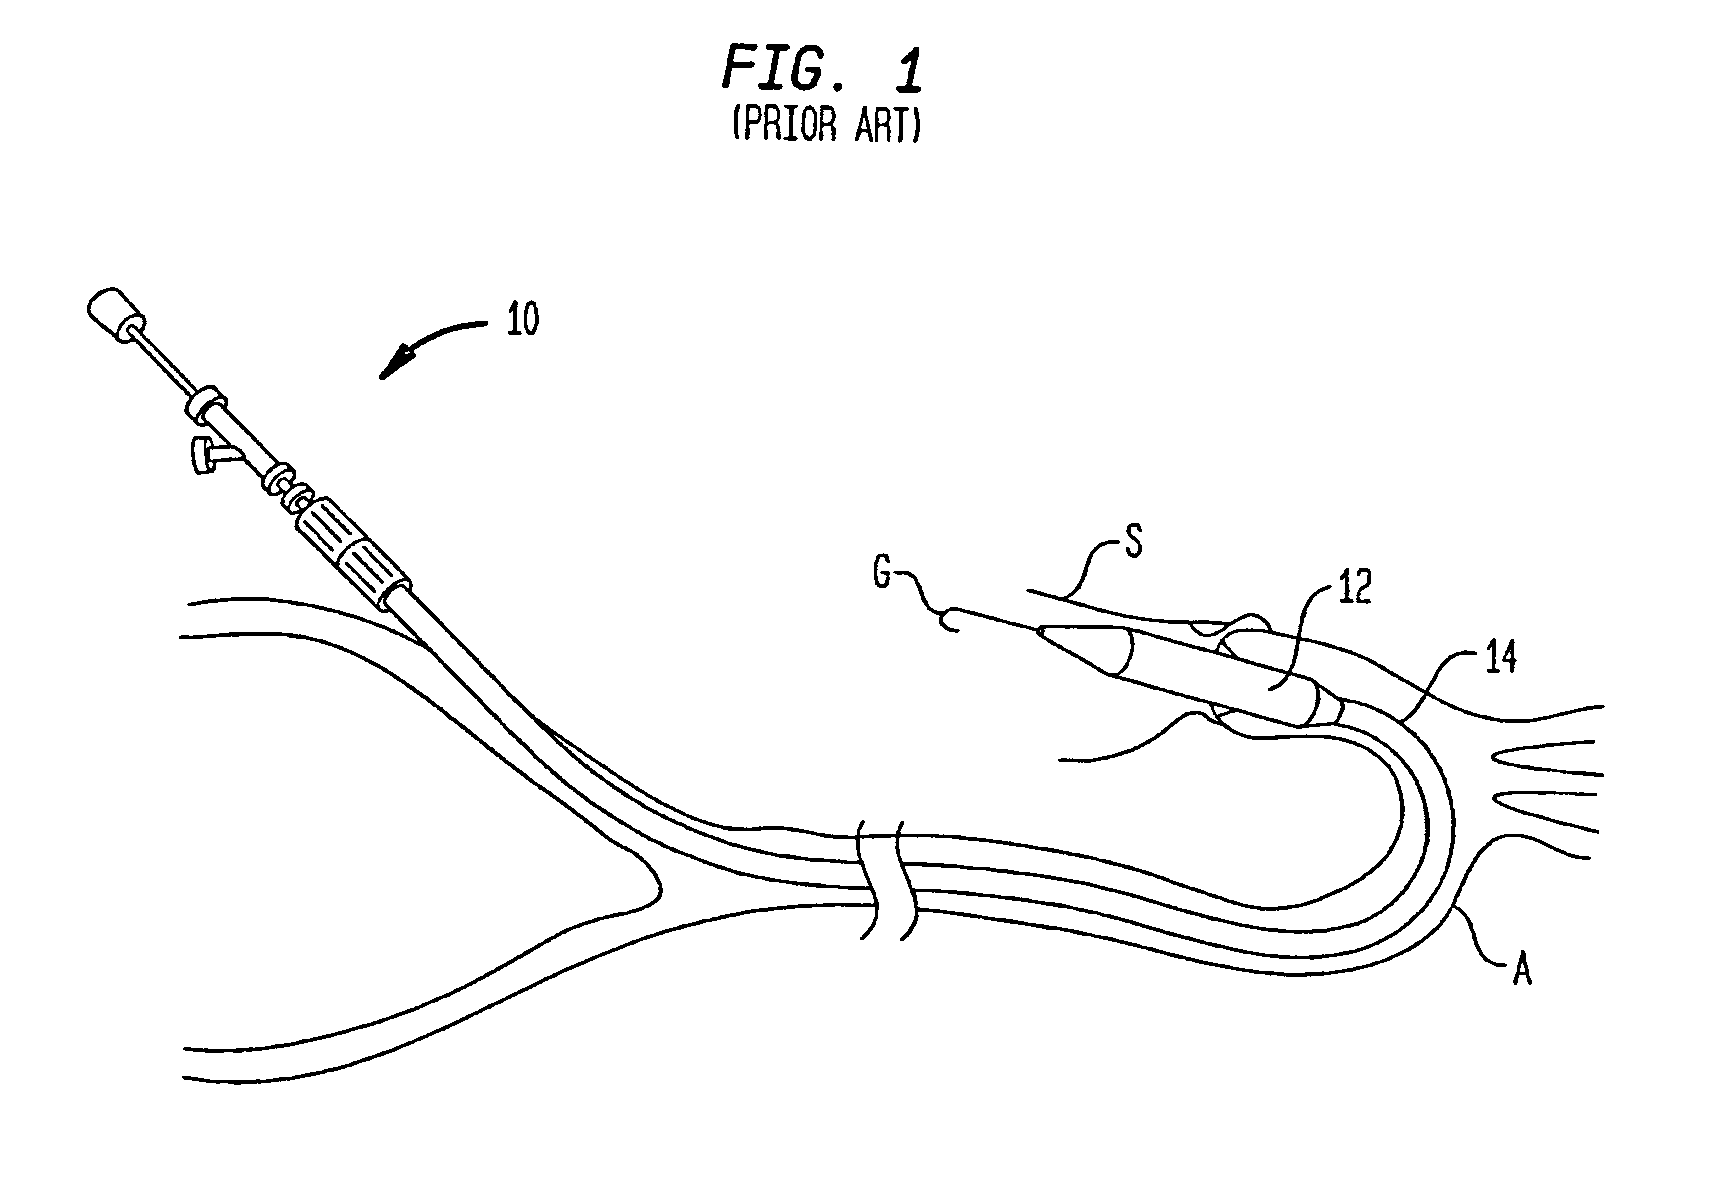 Delivery device having a curved shaft and a straightening member for transcatheter aortic valve implantation